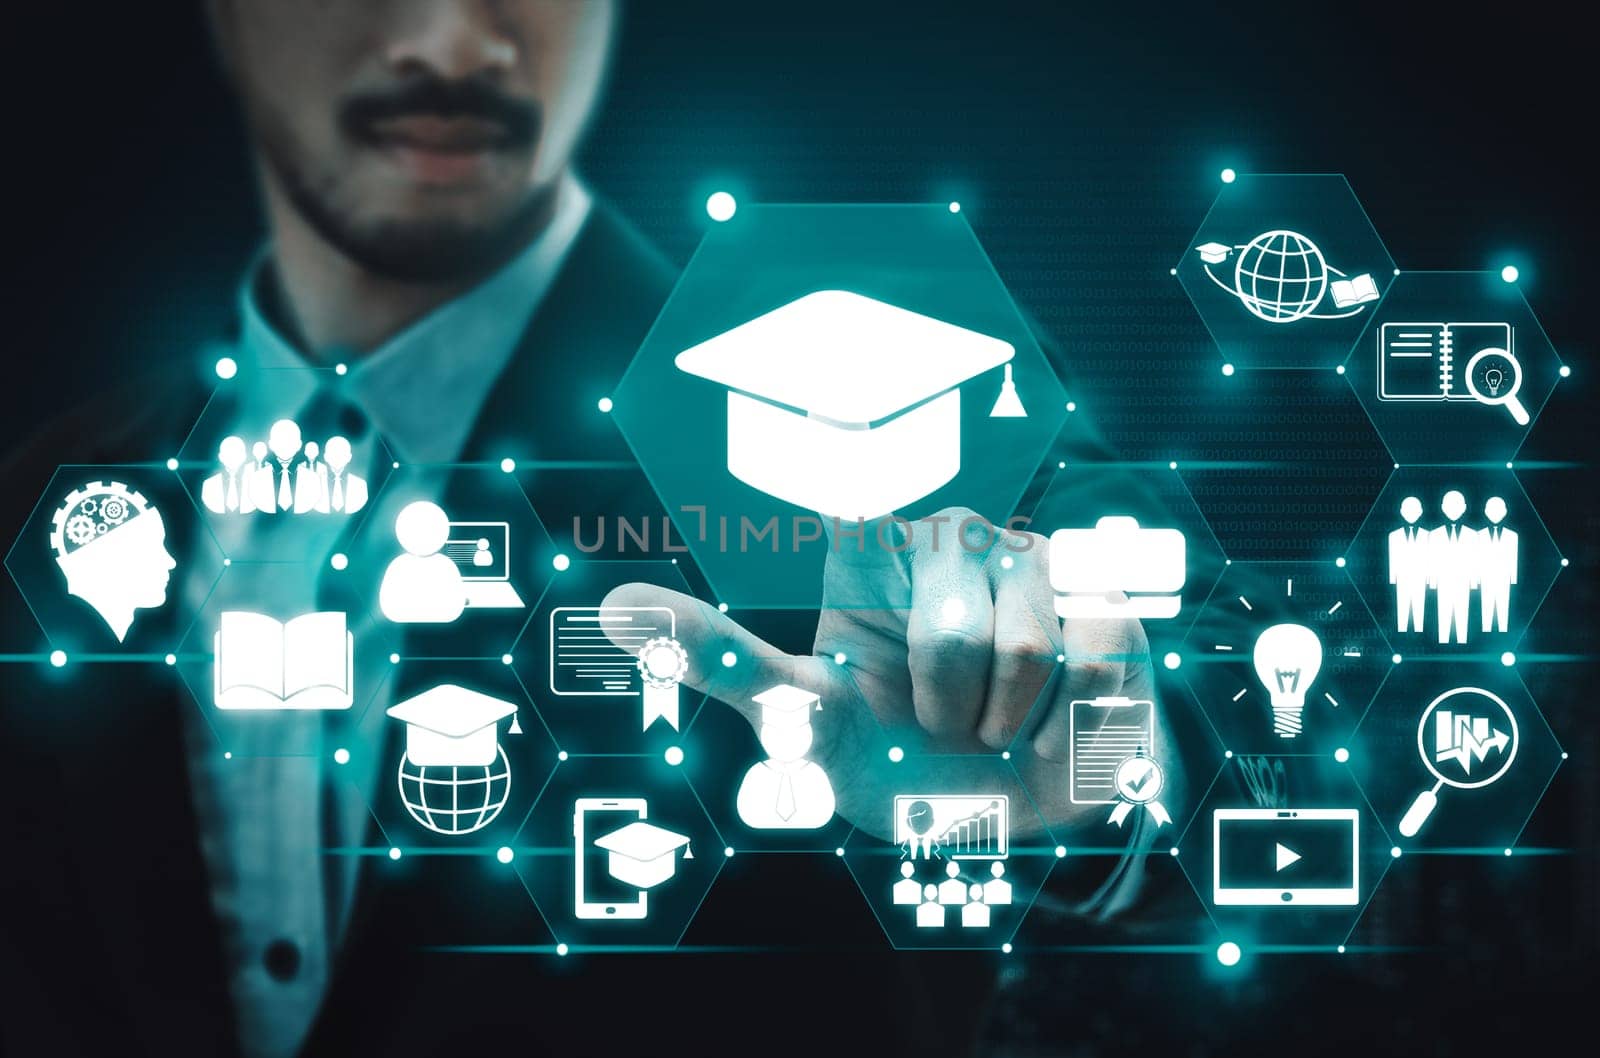 E-learning and Online Education for Student and University Concept. Graphic interface showing technology of digital training course for people to do remote learning from anywhere. uds